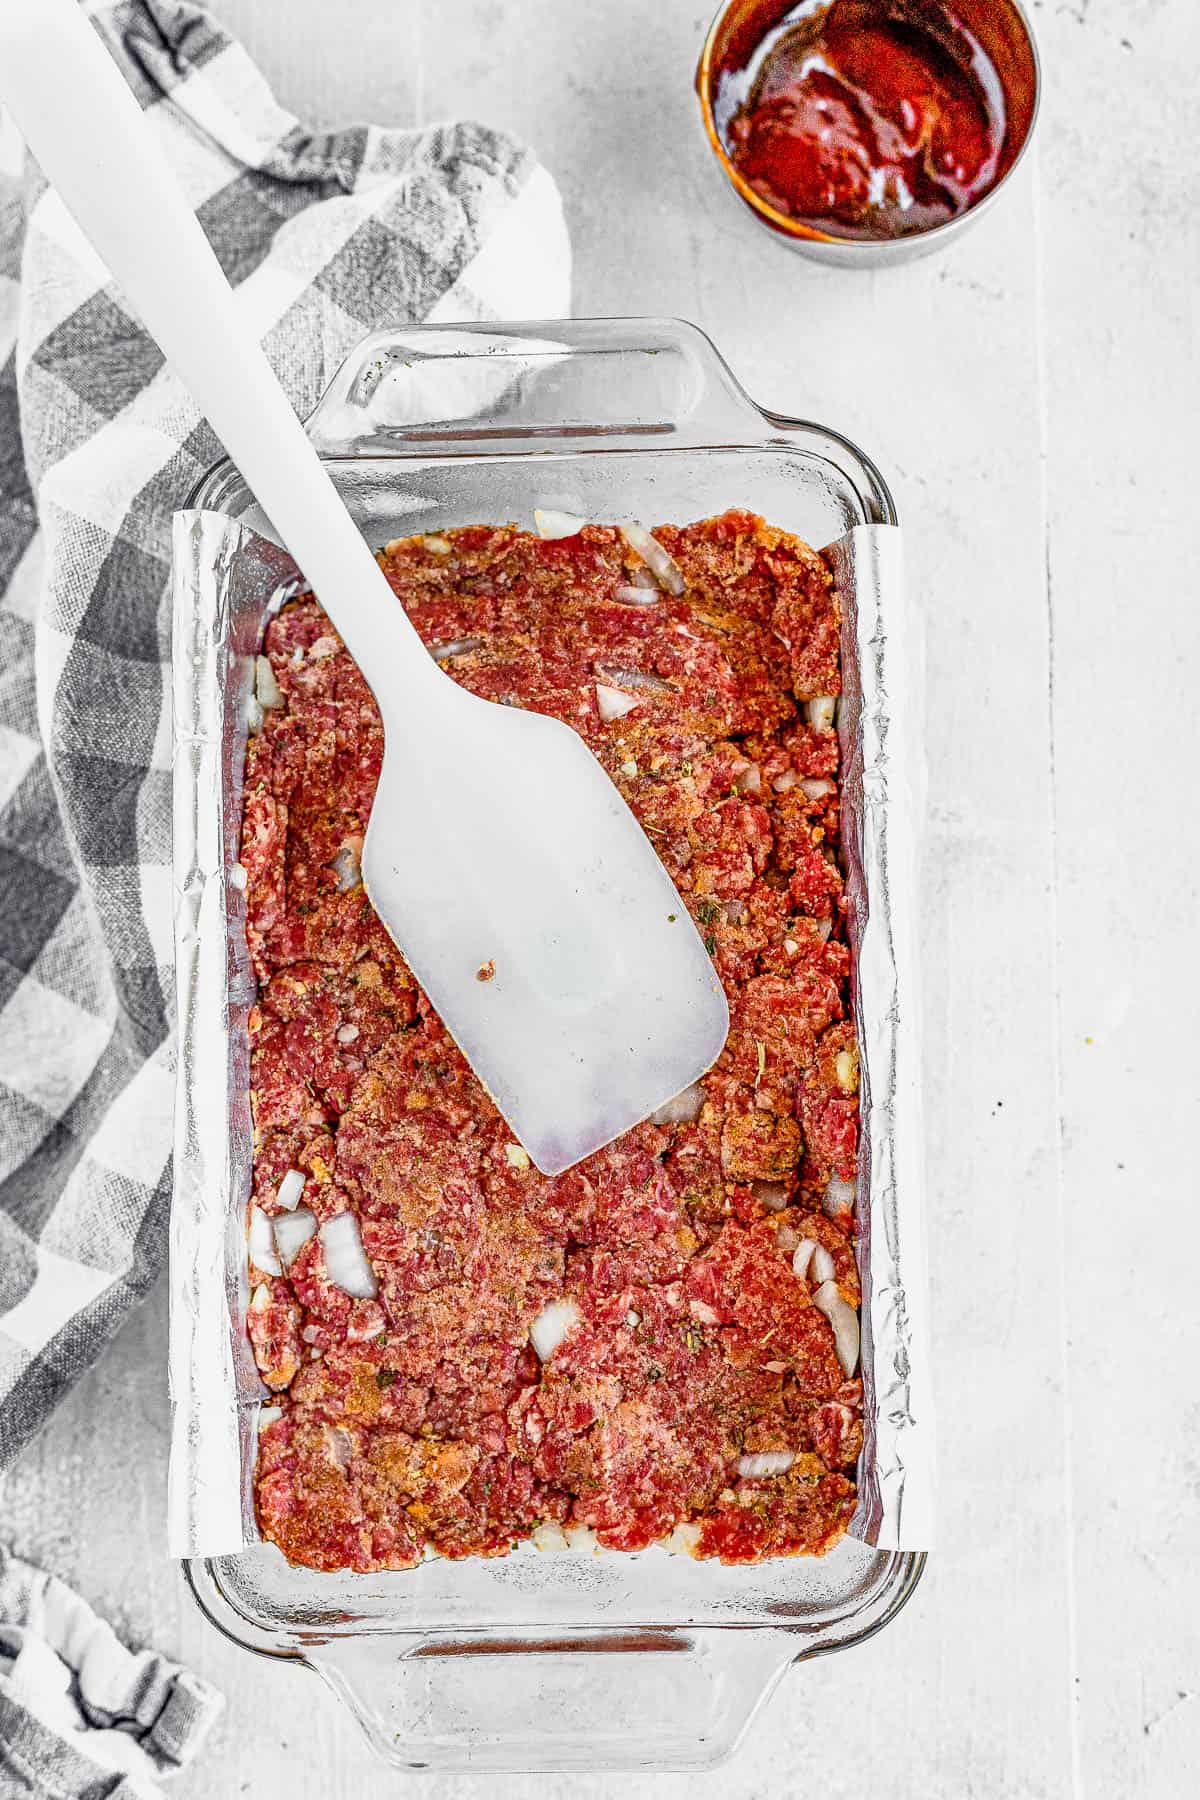 A Spatula Spreading the Meatloaf Mixture Into a Foil-Lined Pan